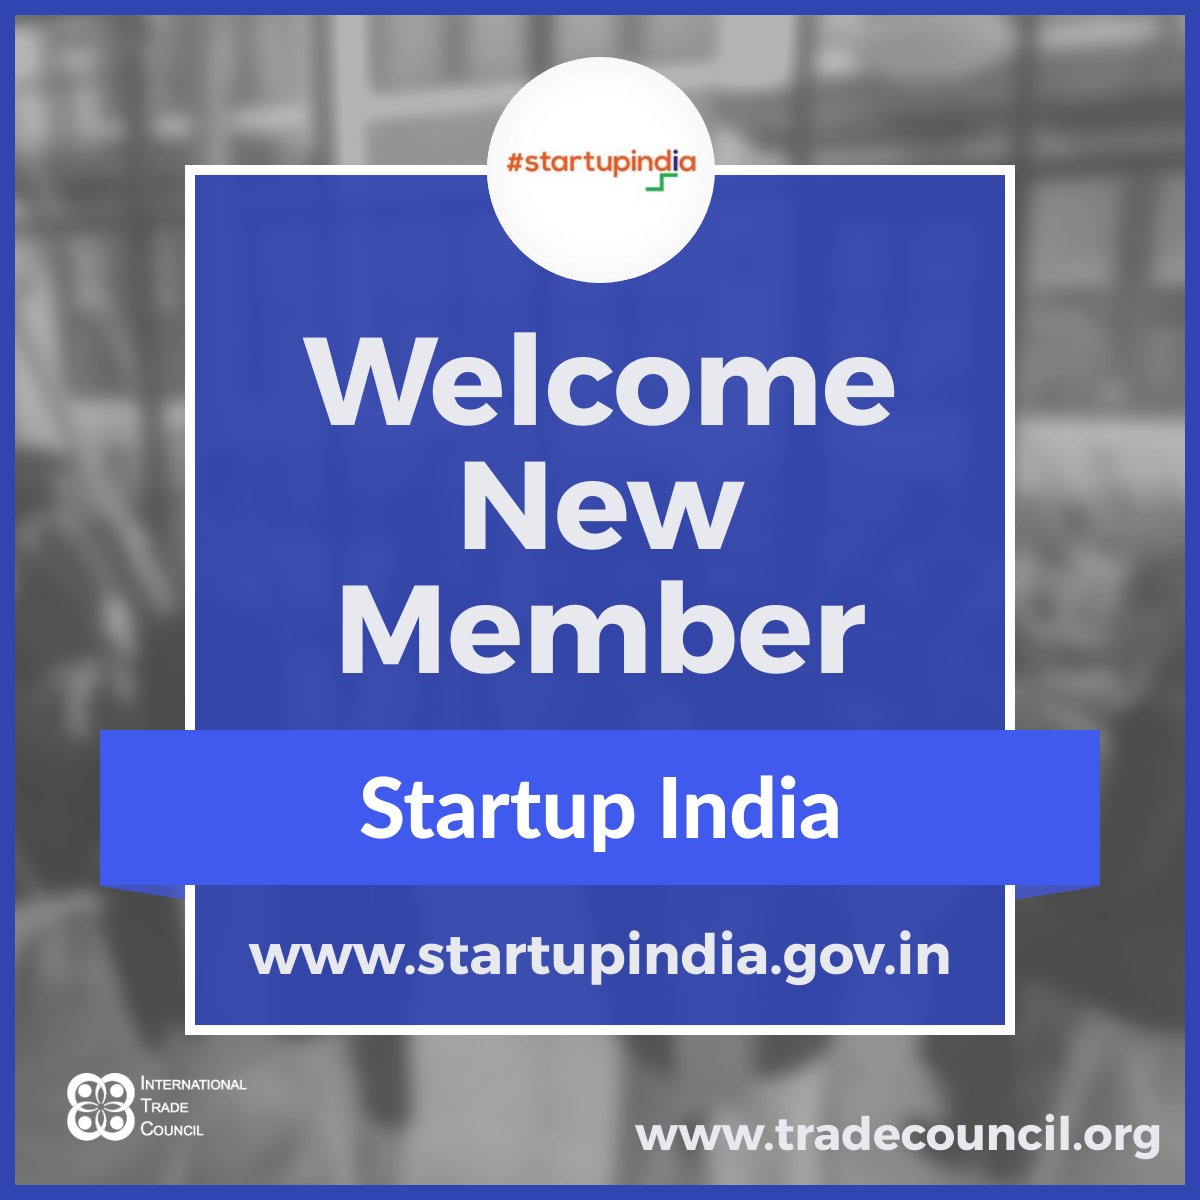 Welcome, Shreekant Patil, Founder & Mentor at Startup India to the International Trade Council. Startup India is a government initiative aimed at fostering innovation and startups to boost economic growth and create jobs in India.